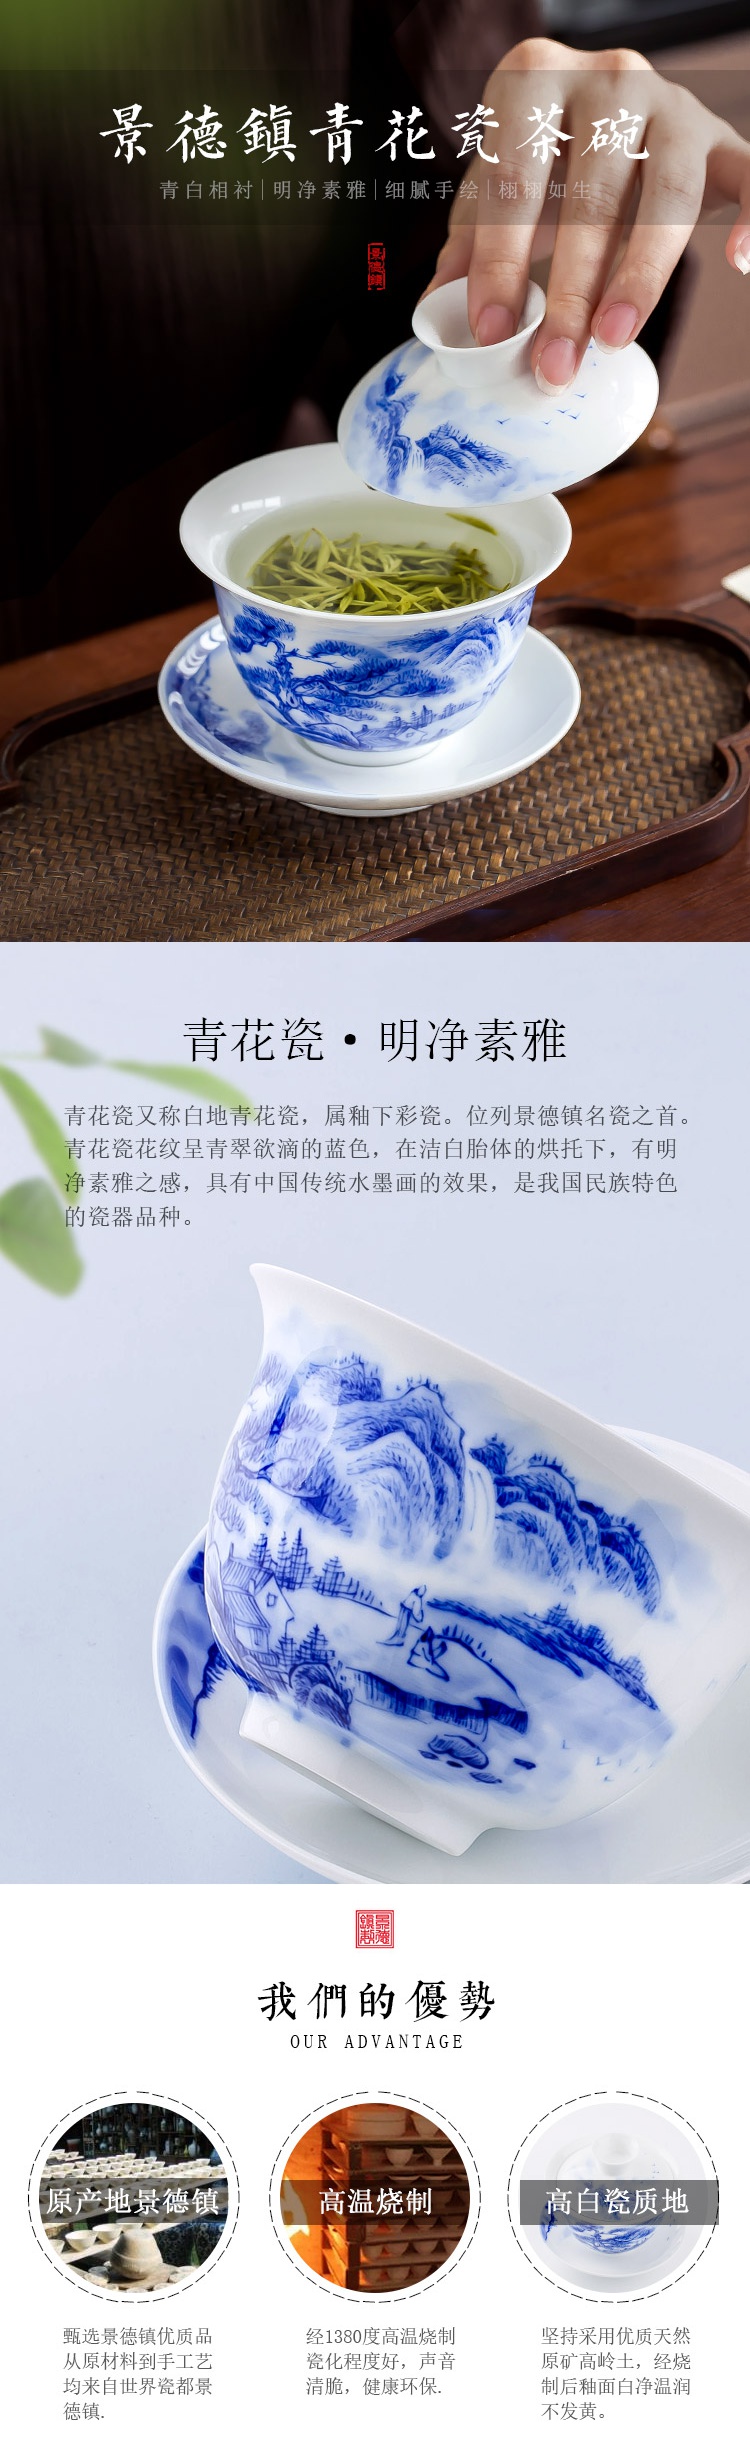 The Poly real scene of jingdezhen porcelain kung fu tureen hand size blue and white porcelain ceramic tea set three cups to tea